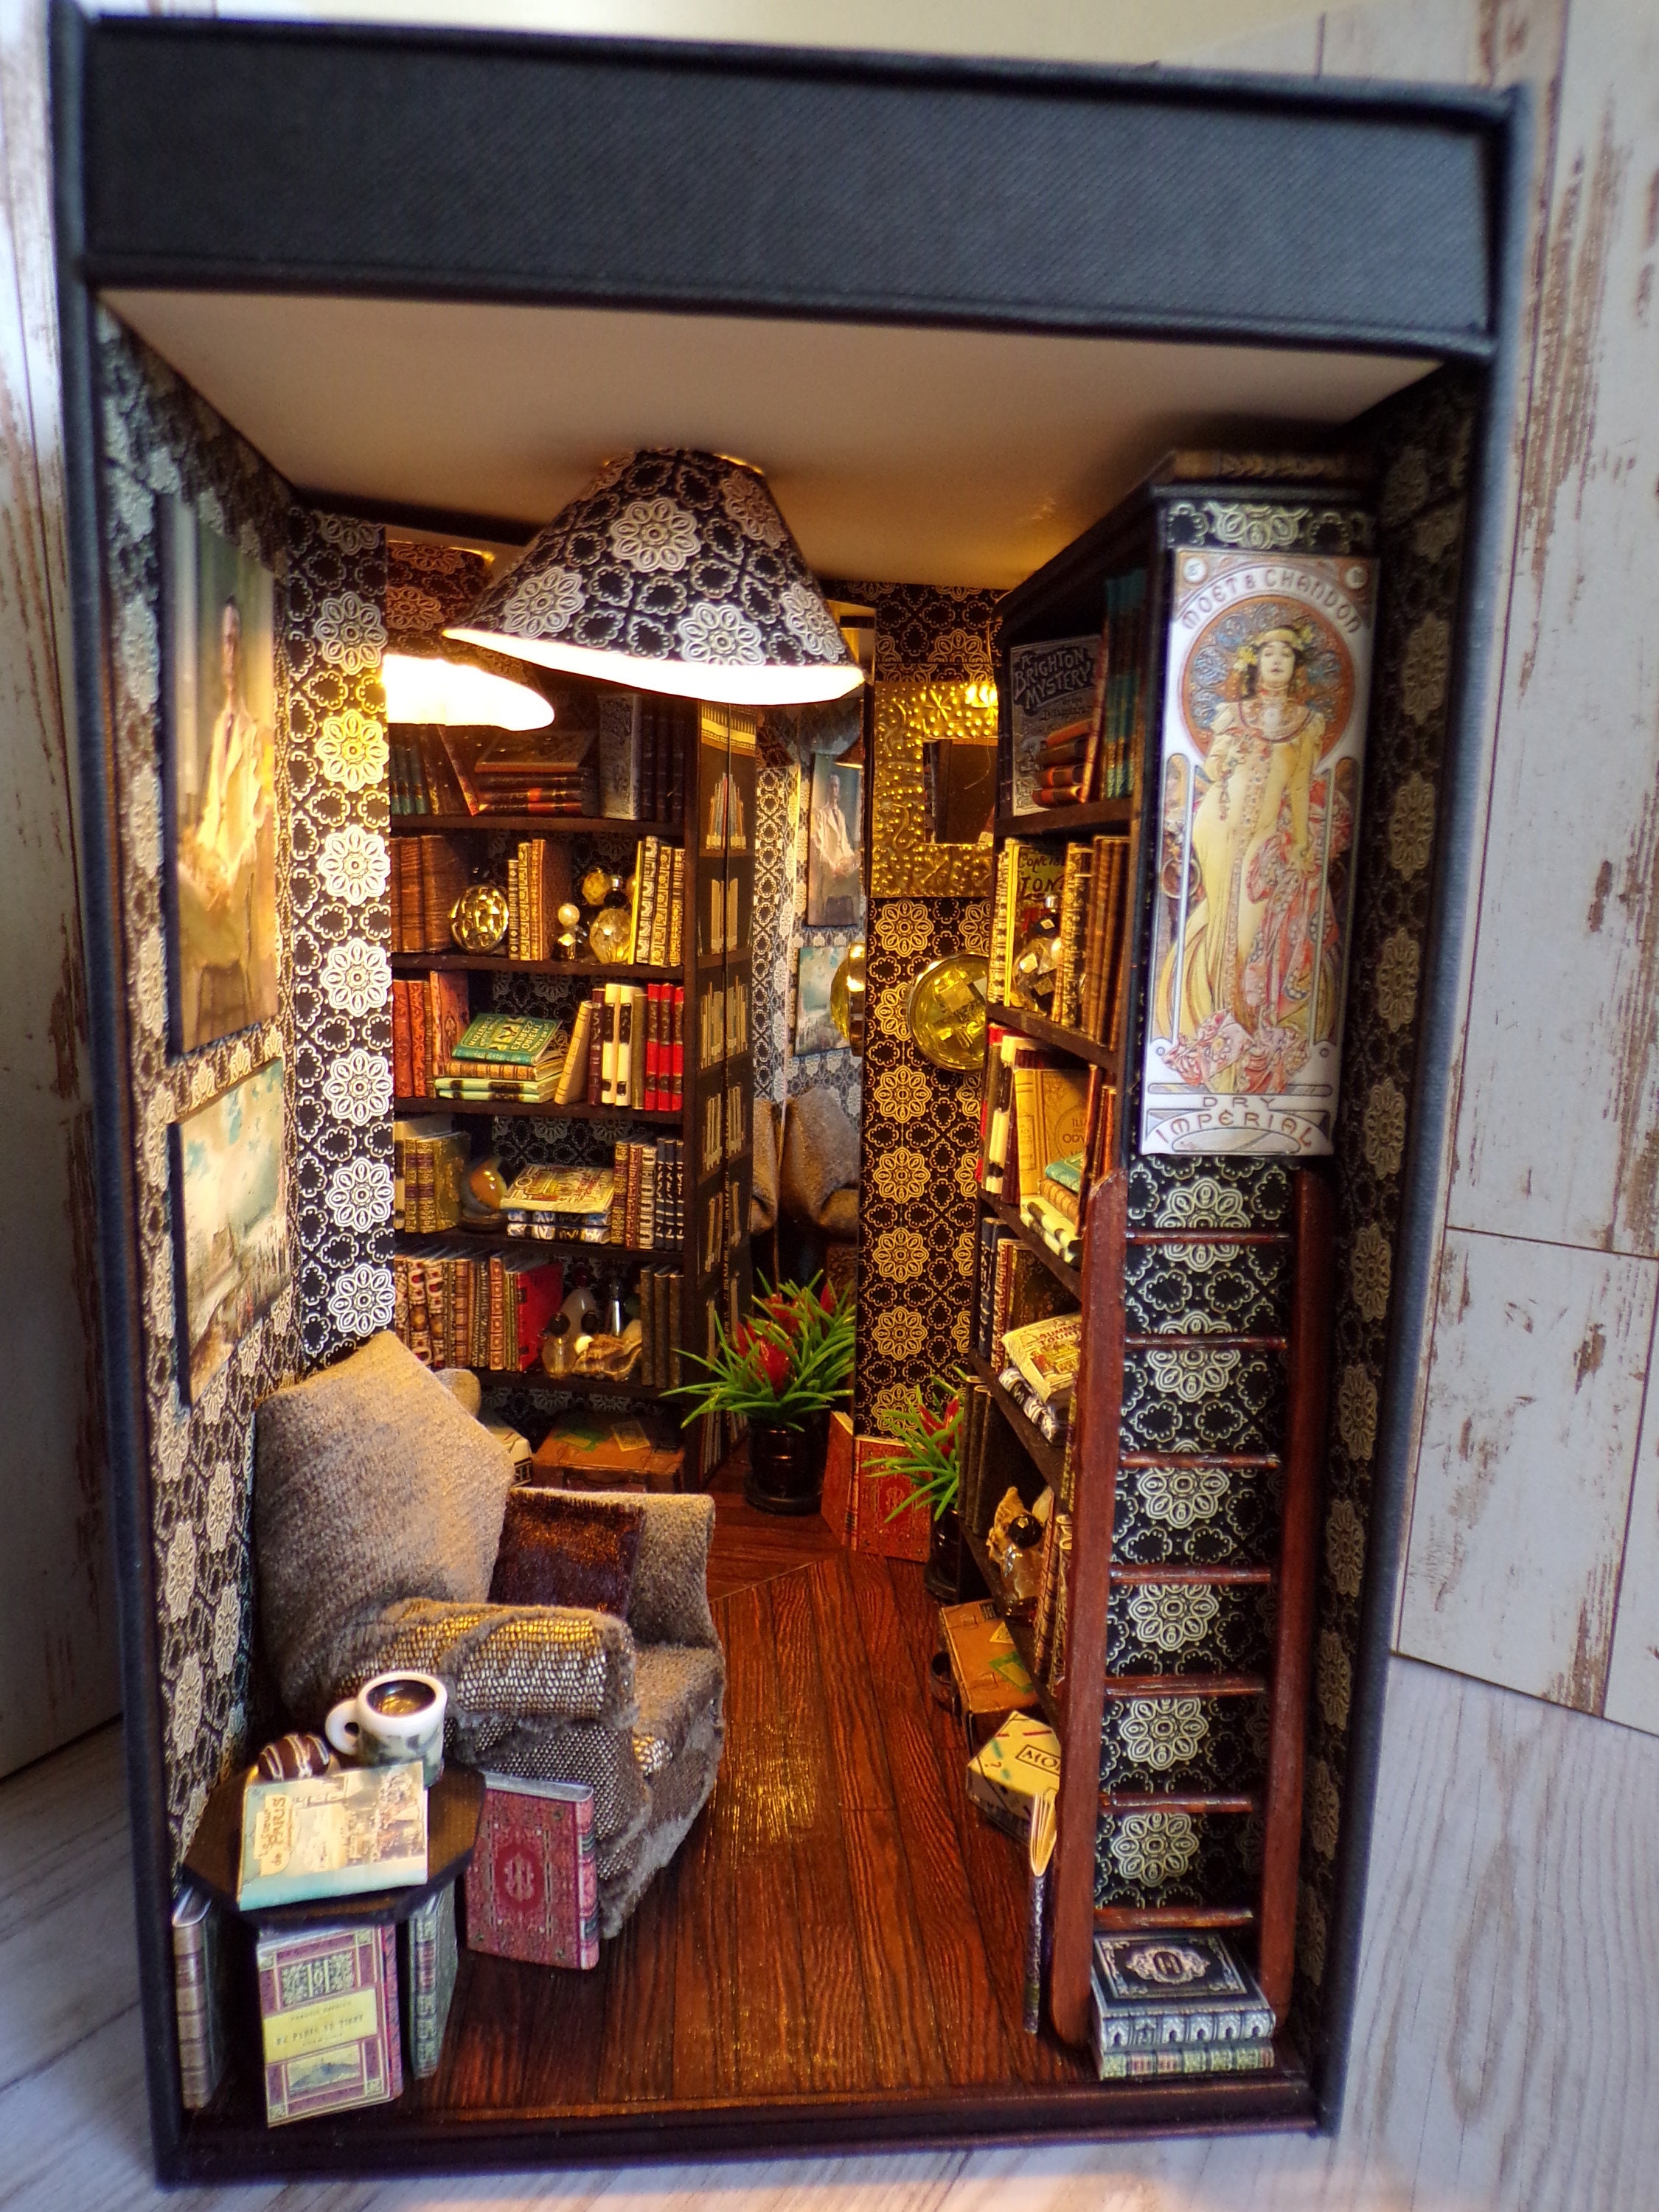 Booknook, Book Nook, Diorama, Miniature Room, Library Room, Heaps of Books,  Cosy Chair, Mirrors, Timer Lights, Ideal Gift. -  Denmark